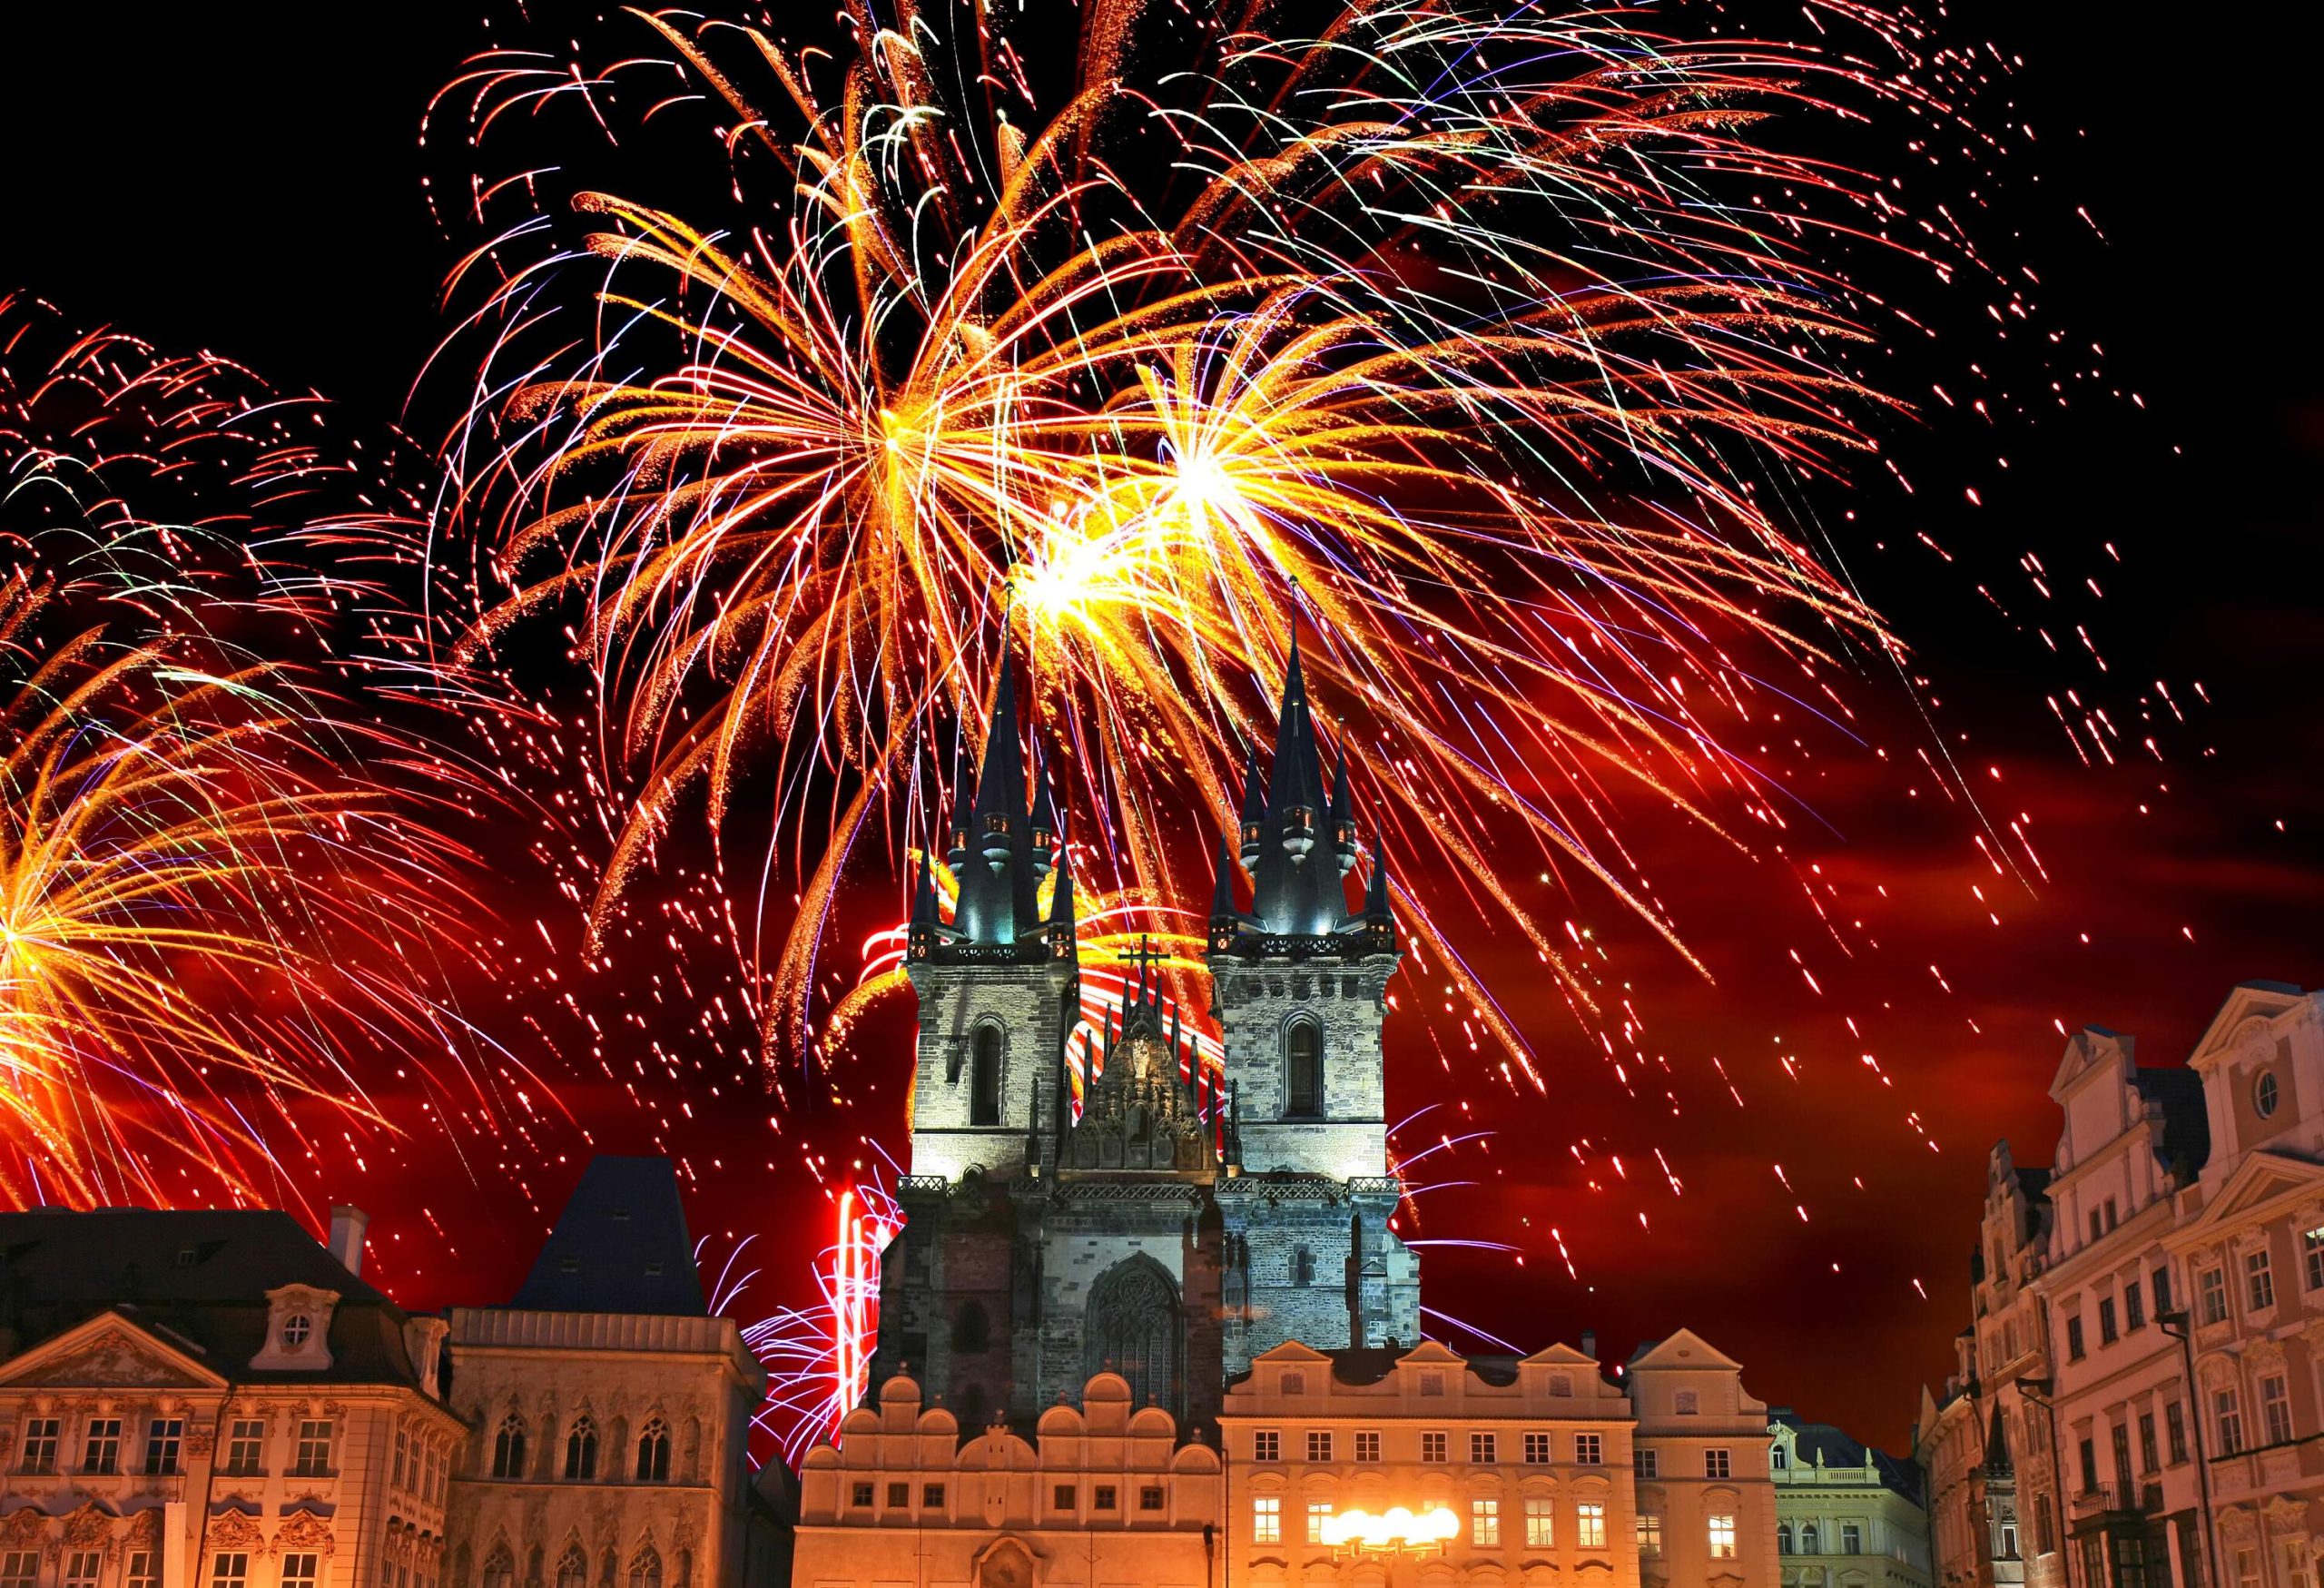 A night-time view of a crowded public square surrounded by illuminated city buildings and a church with pointed twin bell towers under the colourful exploding fireworks.